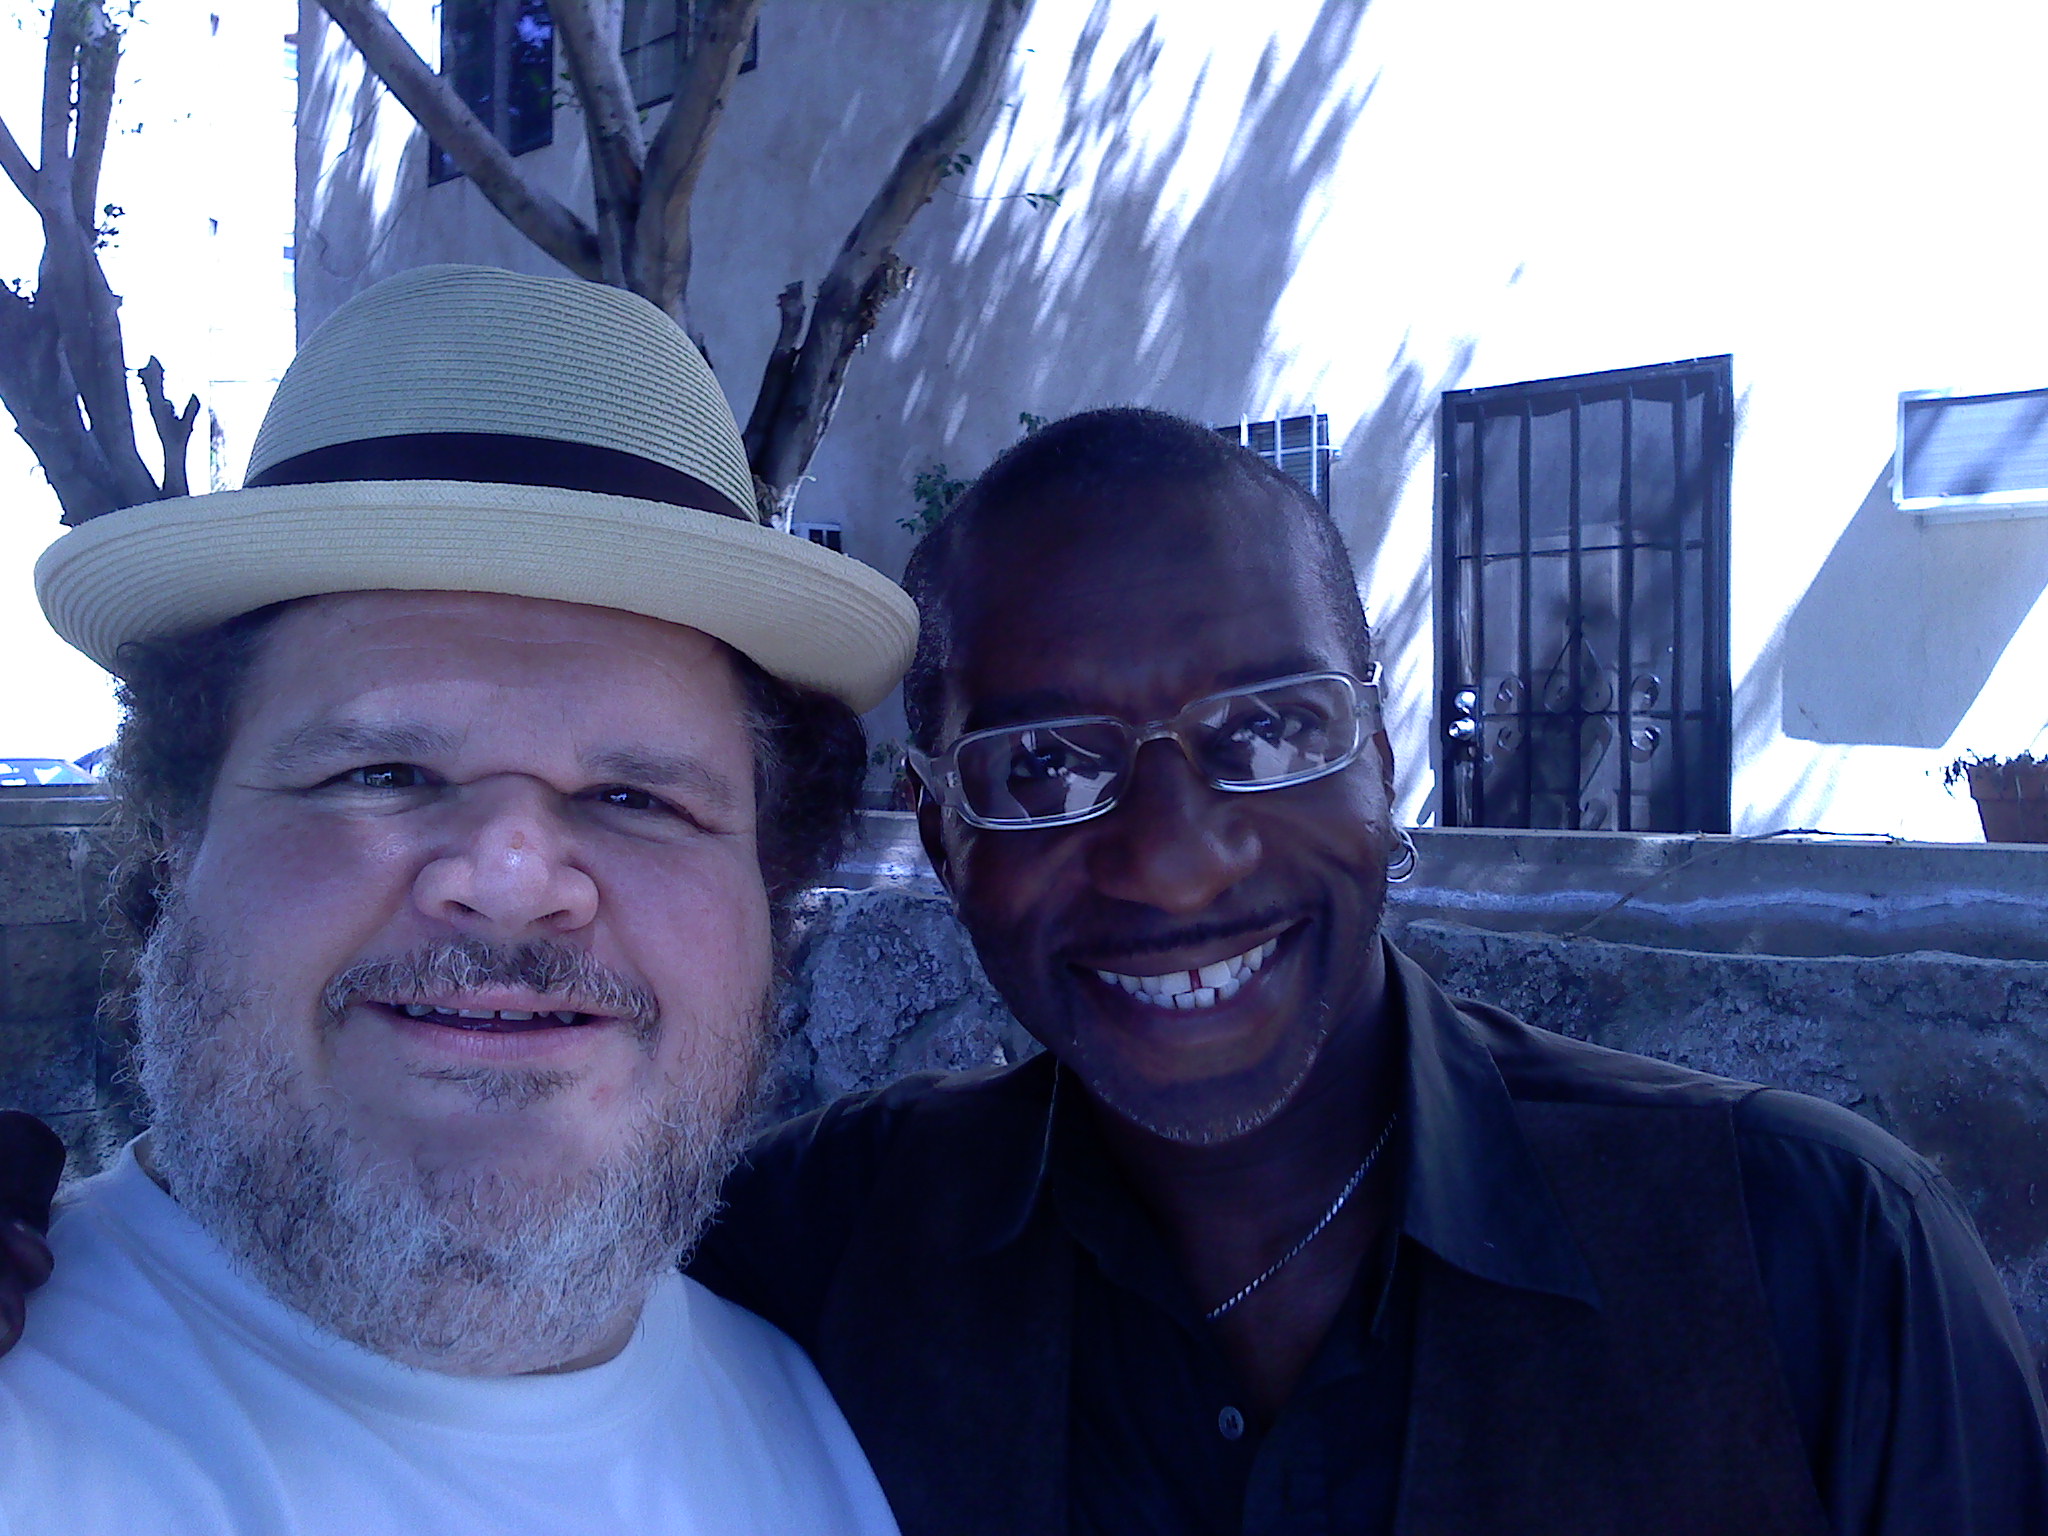 Bubba Da Skitso and radio personality Uncle Earl aka Lacy Phillips in Hollywood